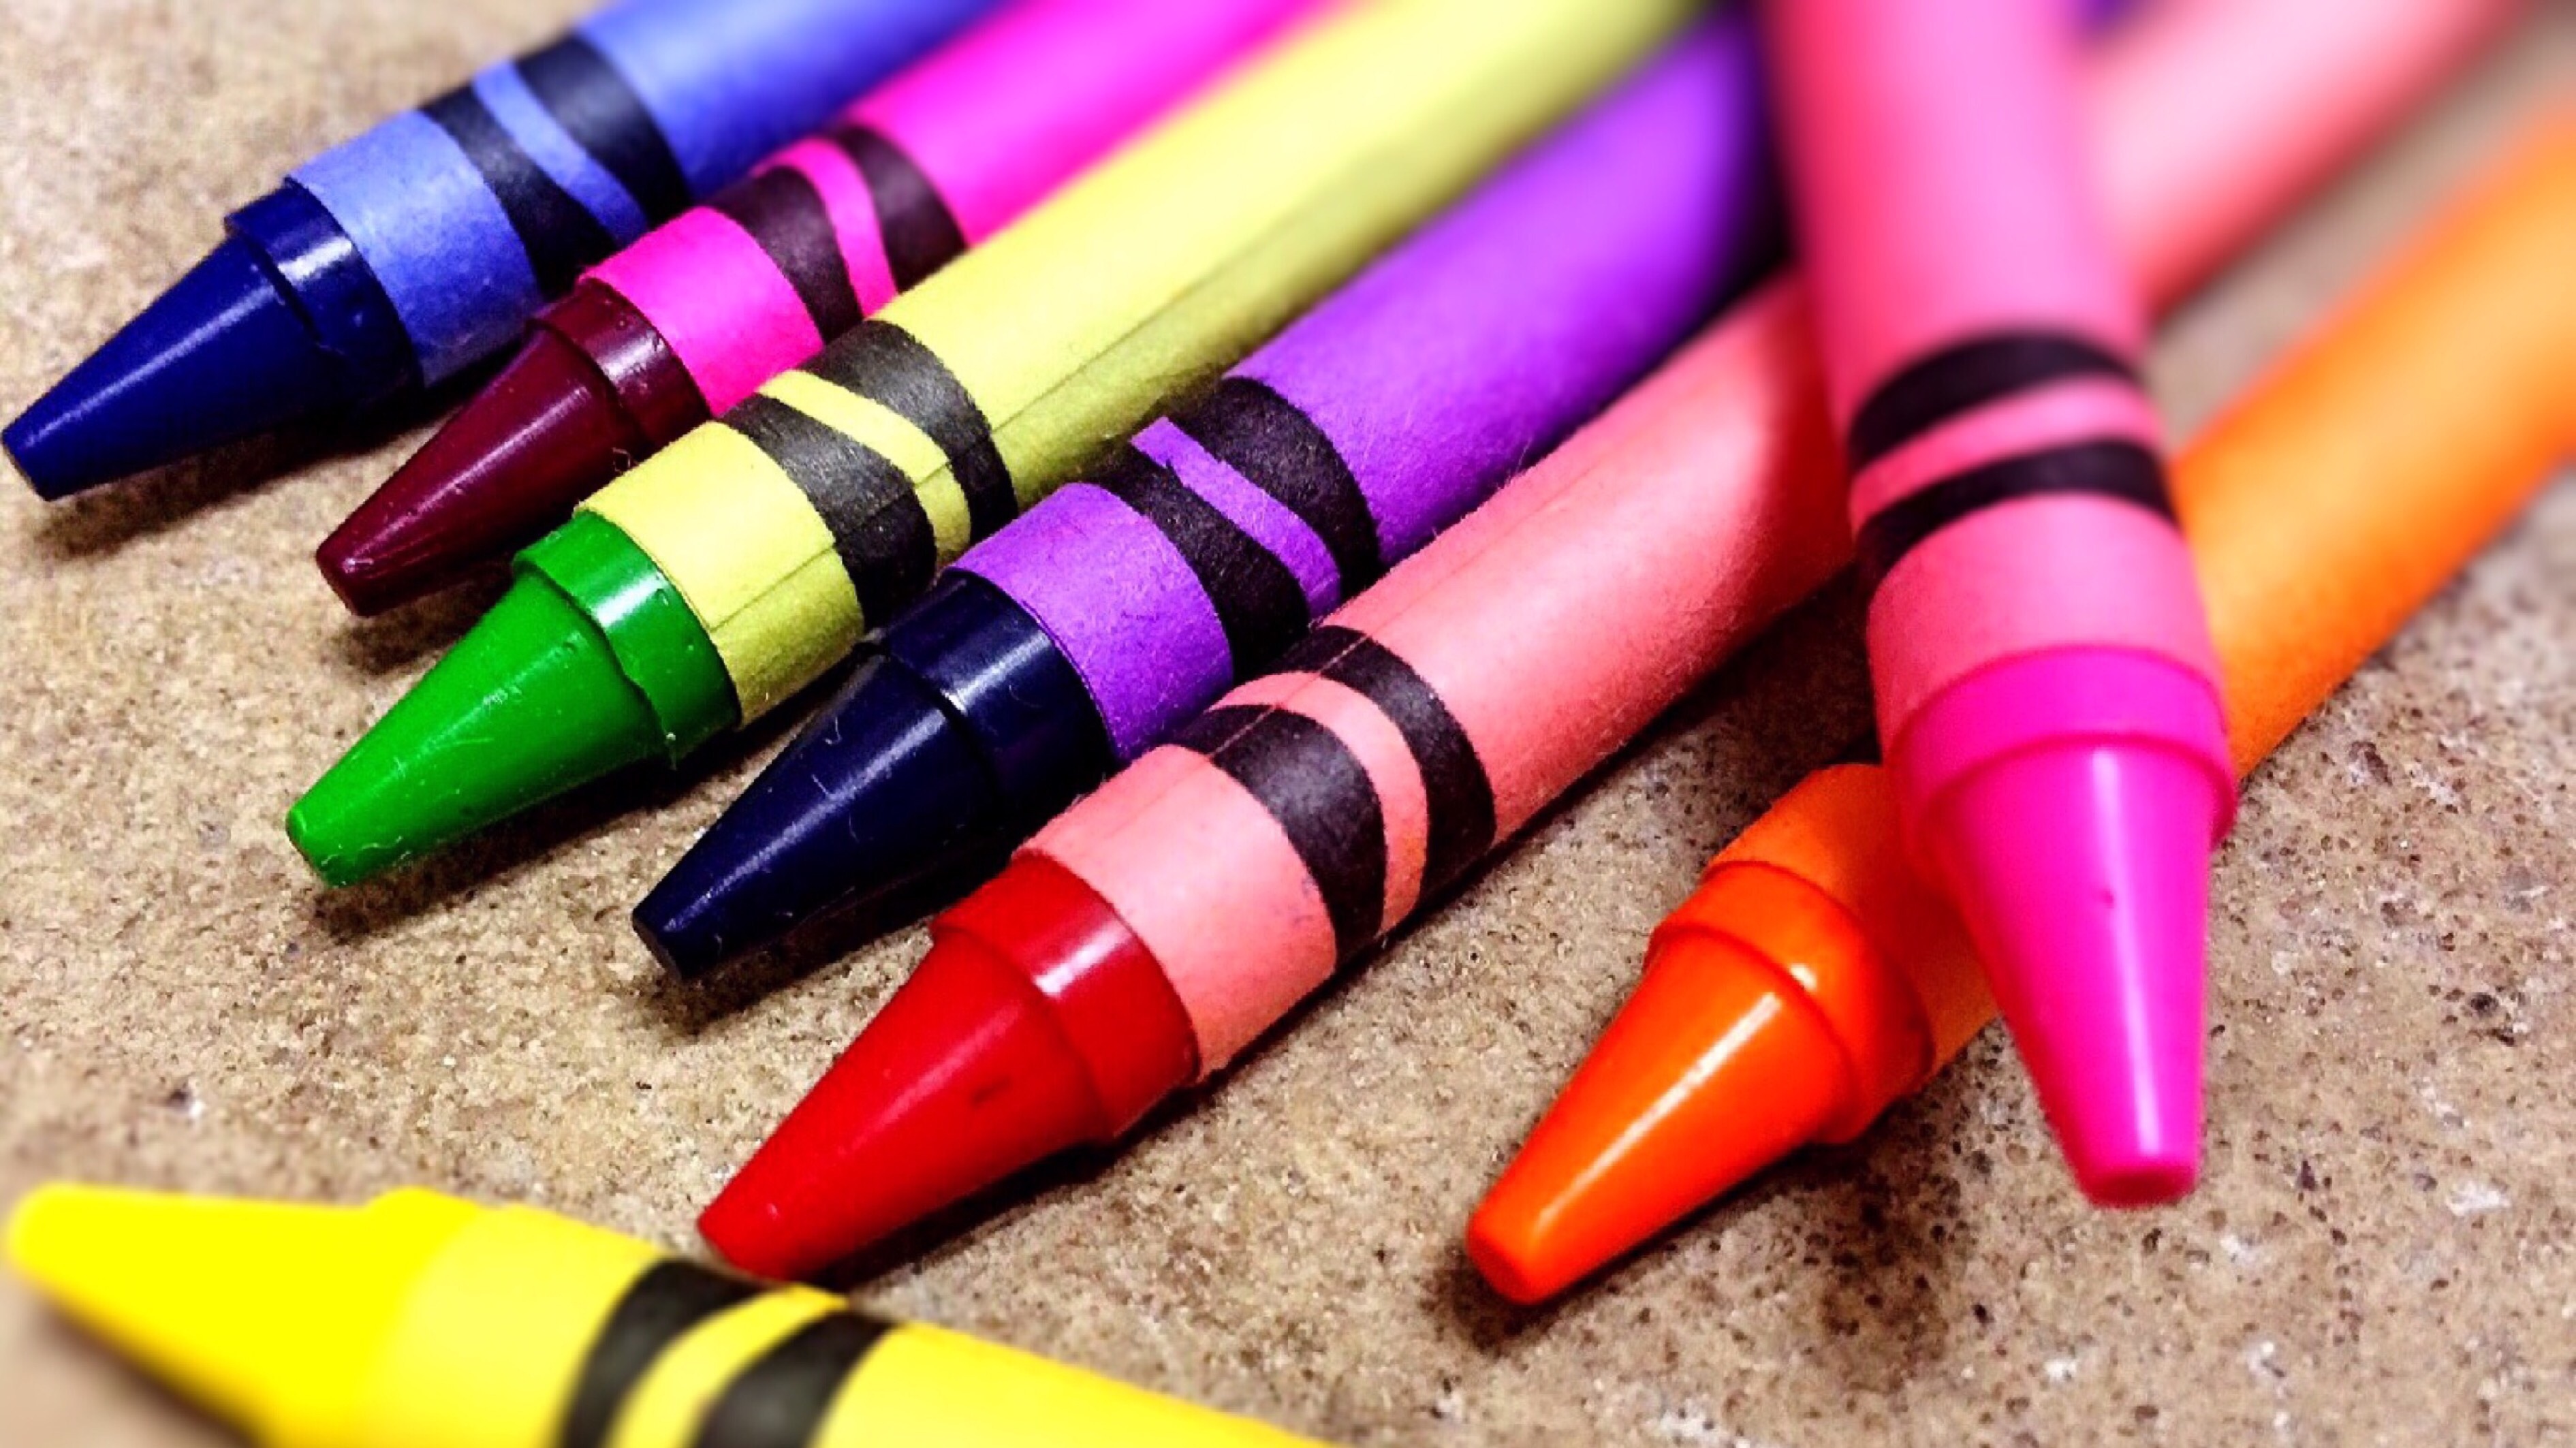 Crayons laying on table